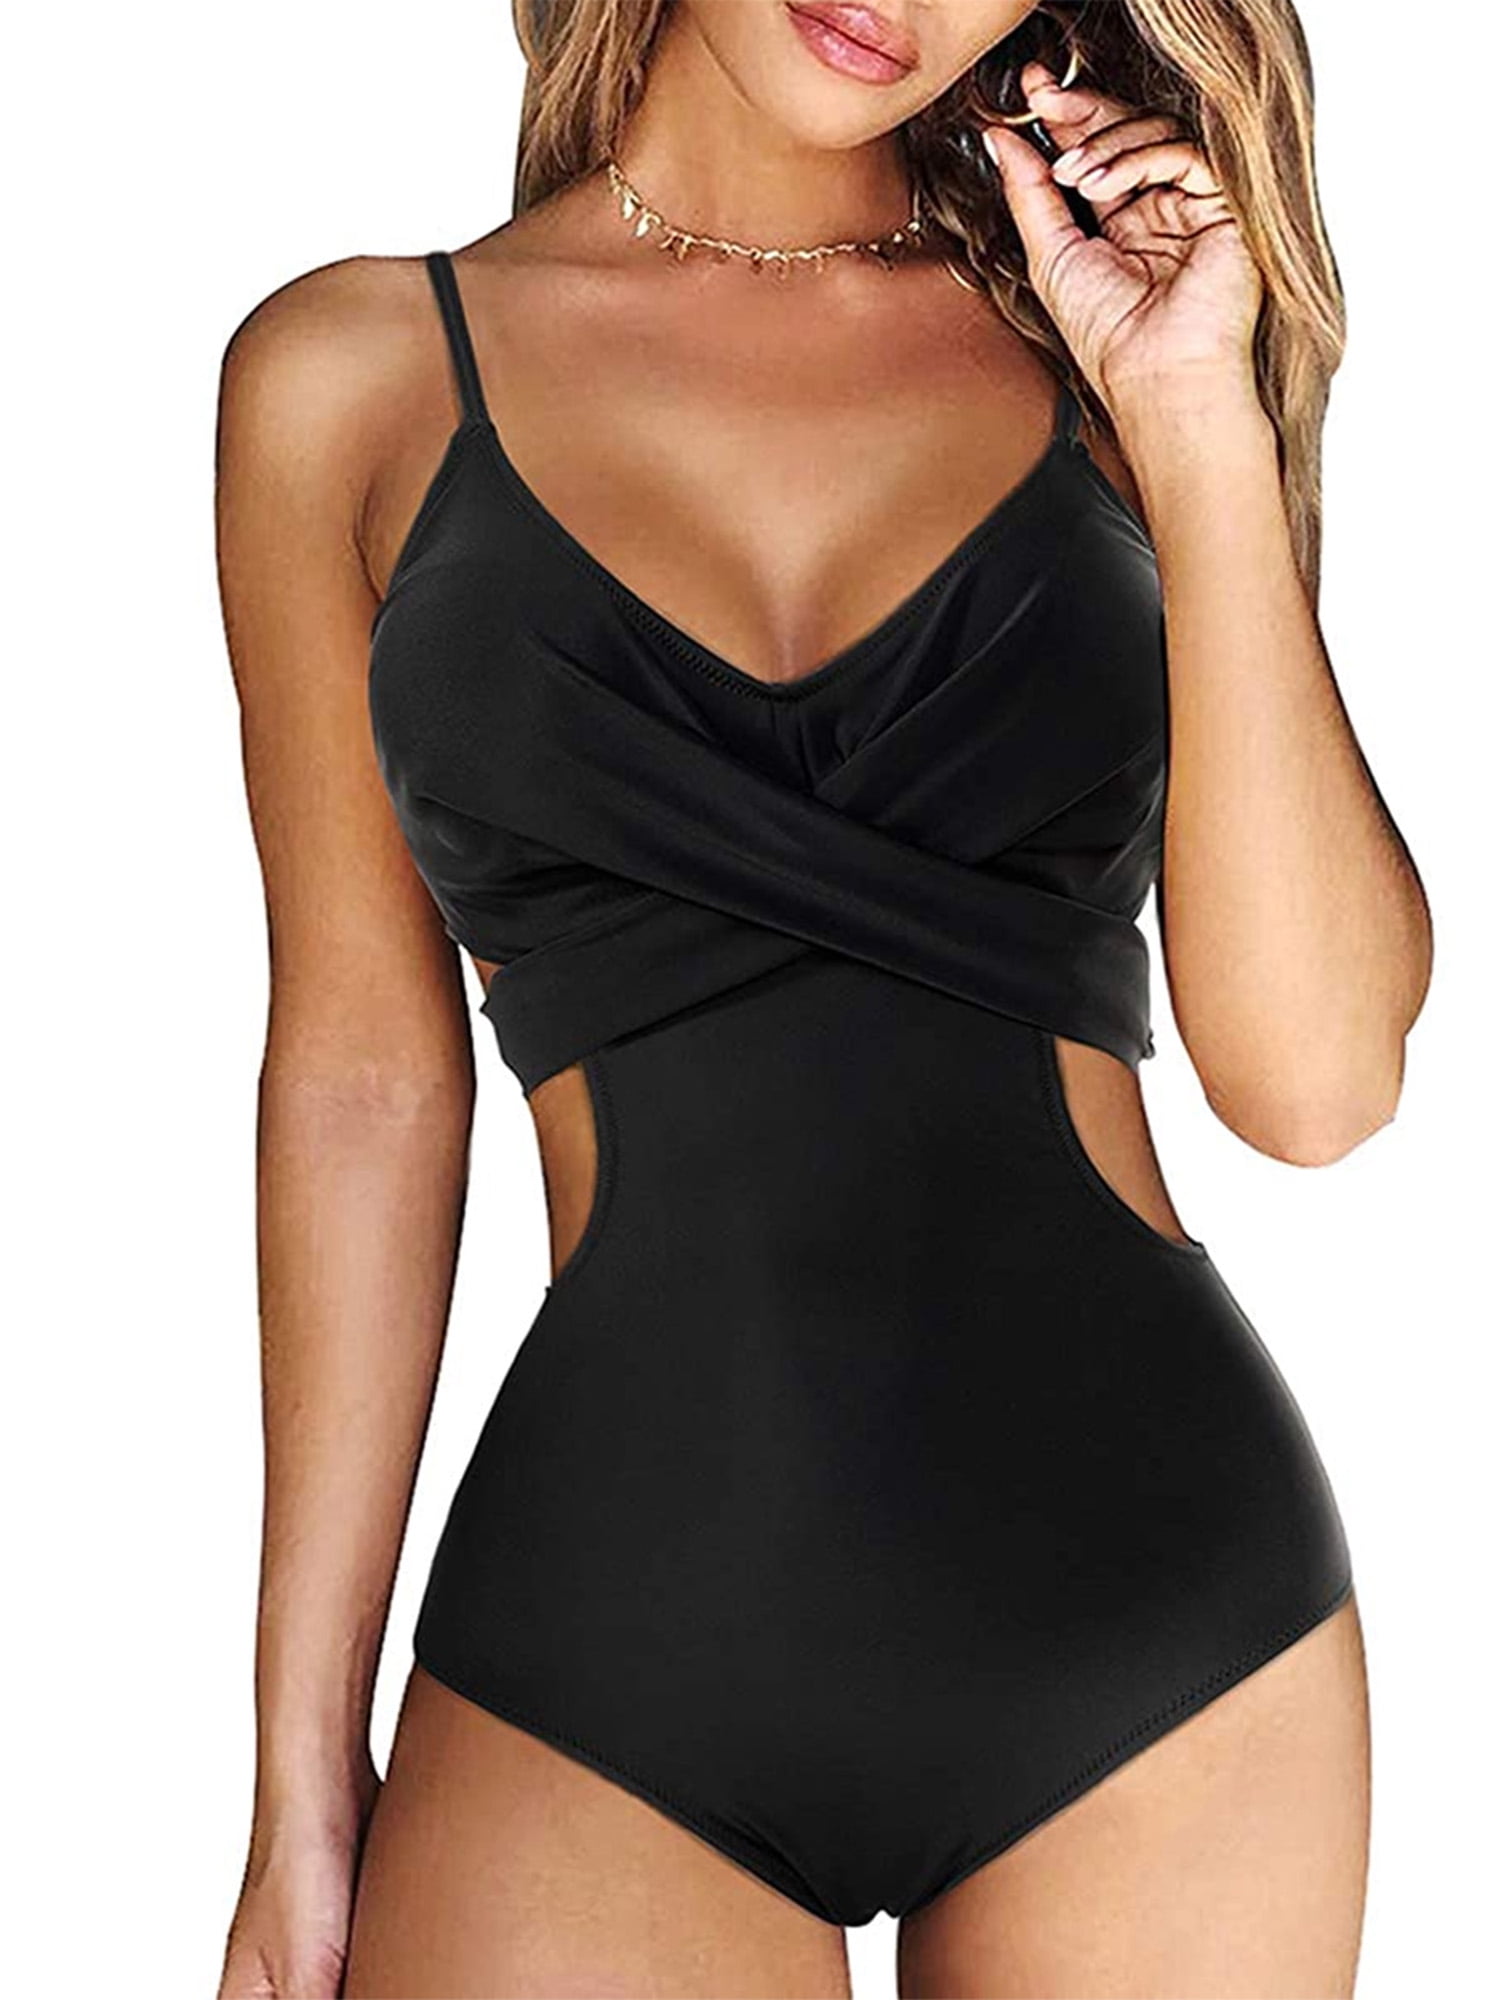 Womens V Neck One Piece Swimsuit Criss Cross String Bikini Hollow Out Swimsuit Halter Bathing Suit